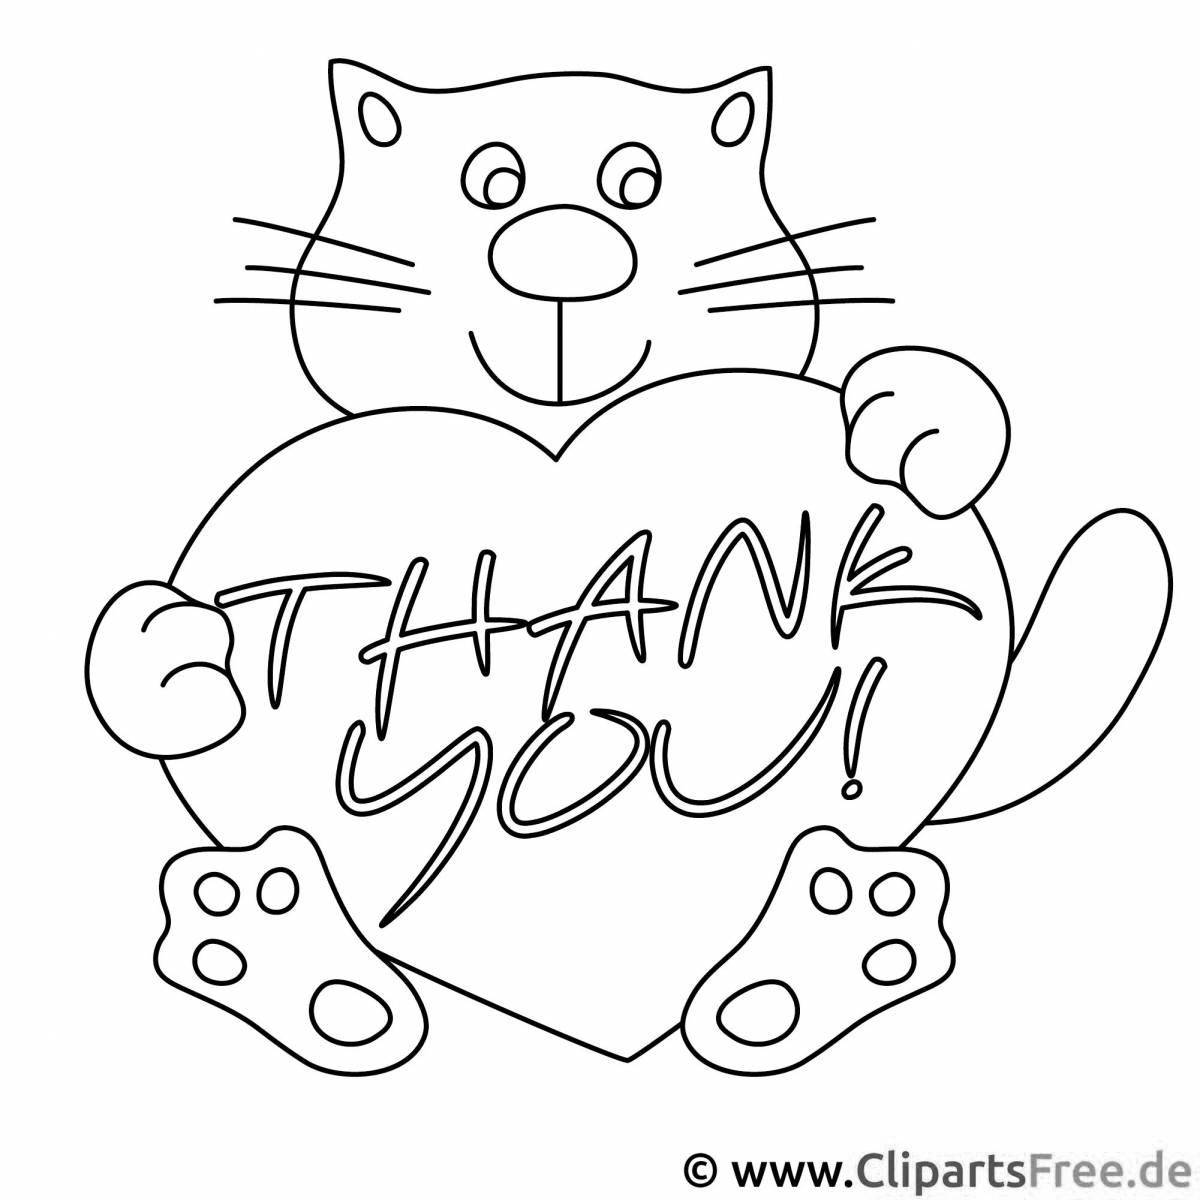 Fun thank you coloring book for kids